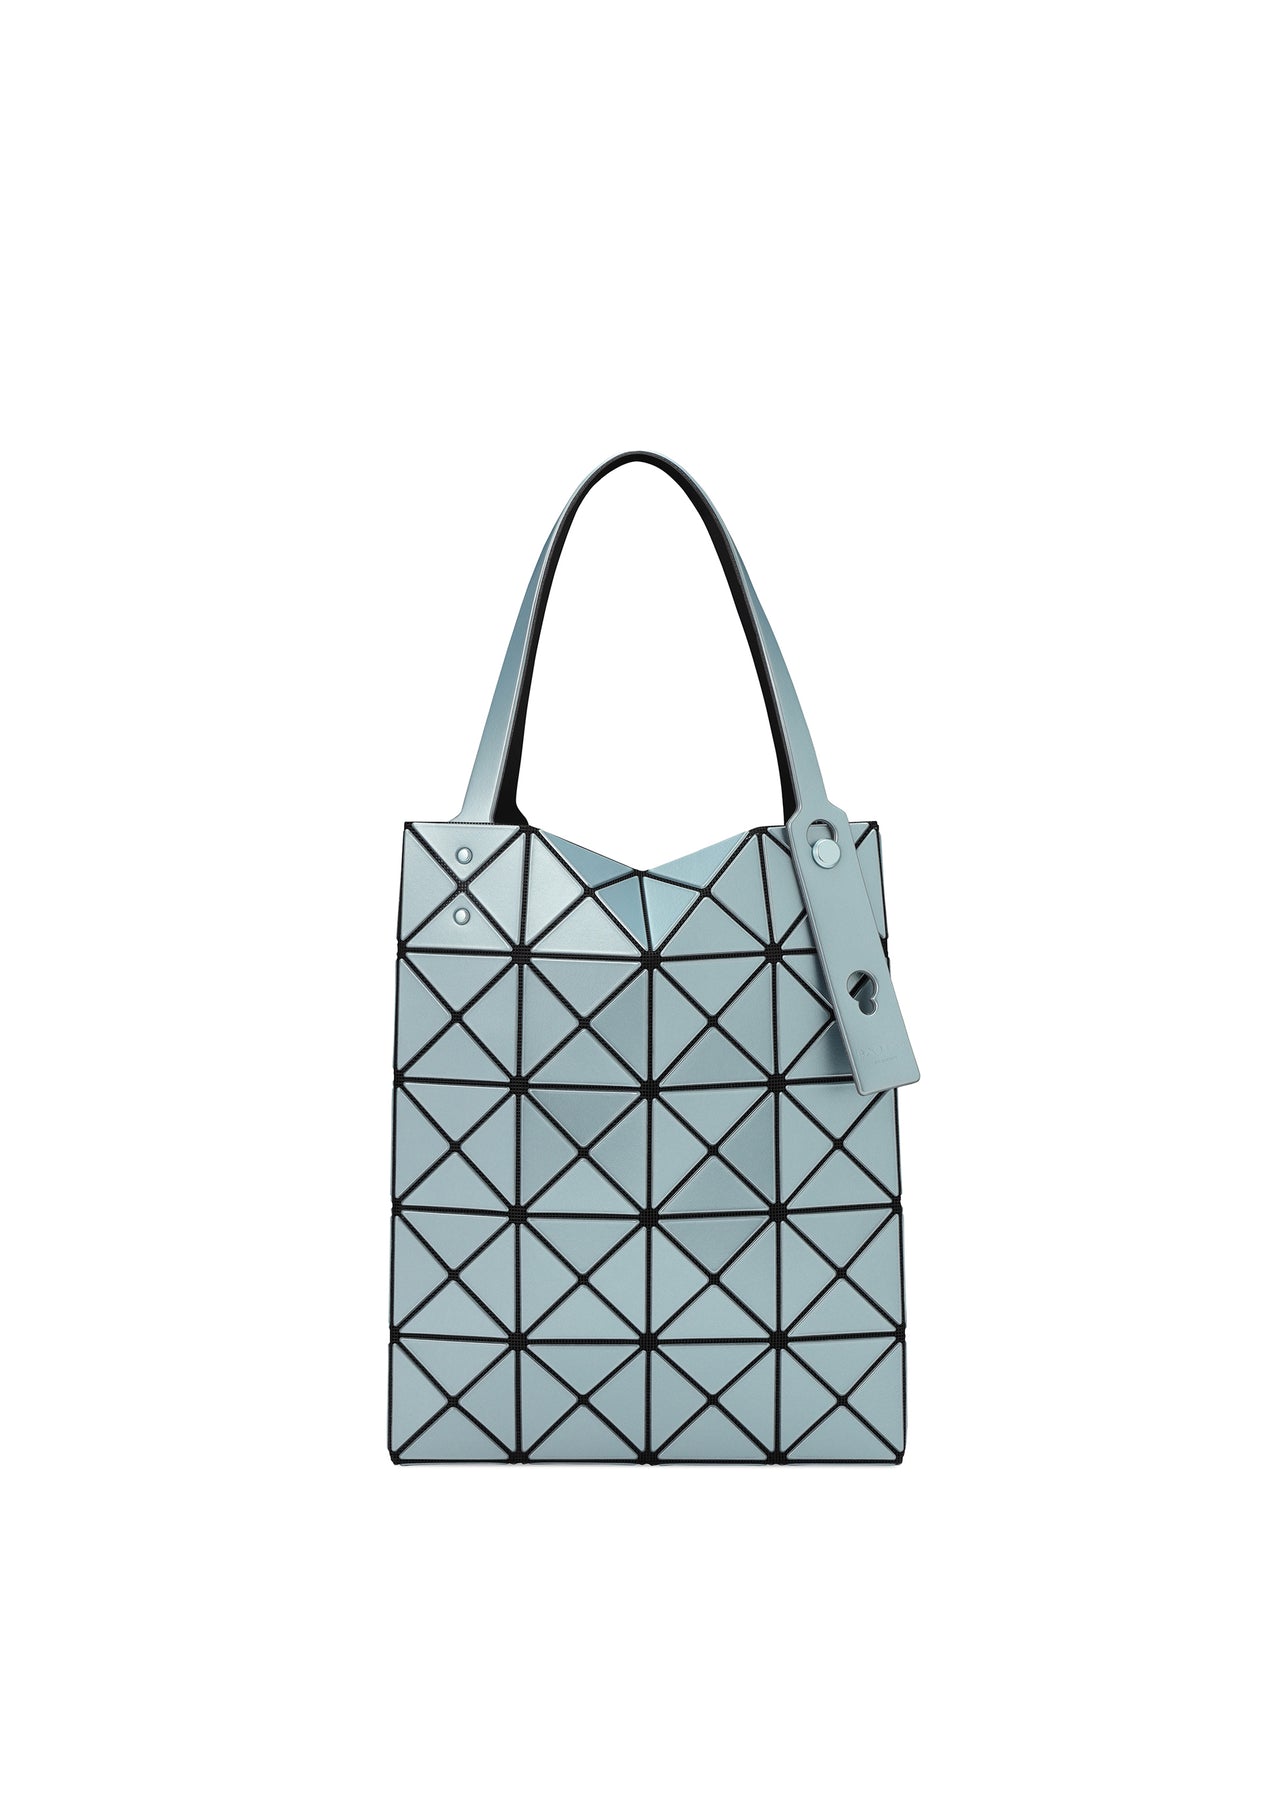 LUCENT BOXY TOTE BAG | The official ISSEY MIYAKE ONLINE STORE